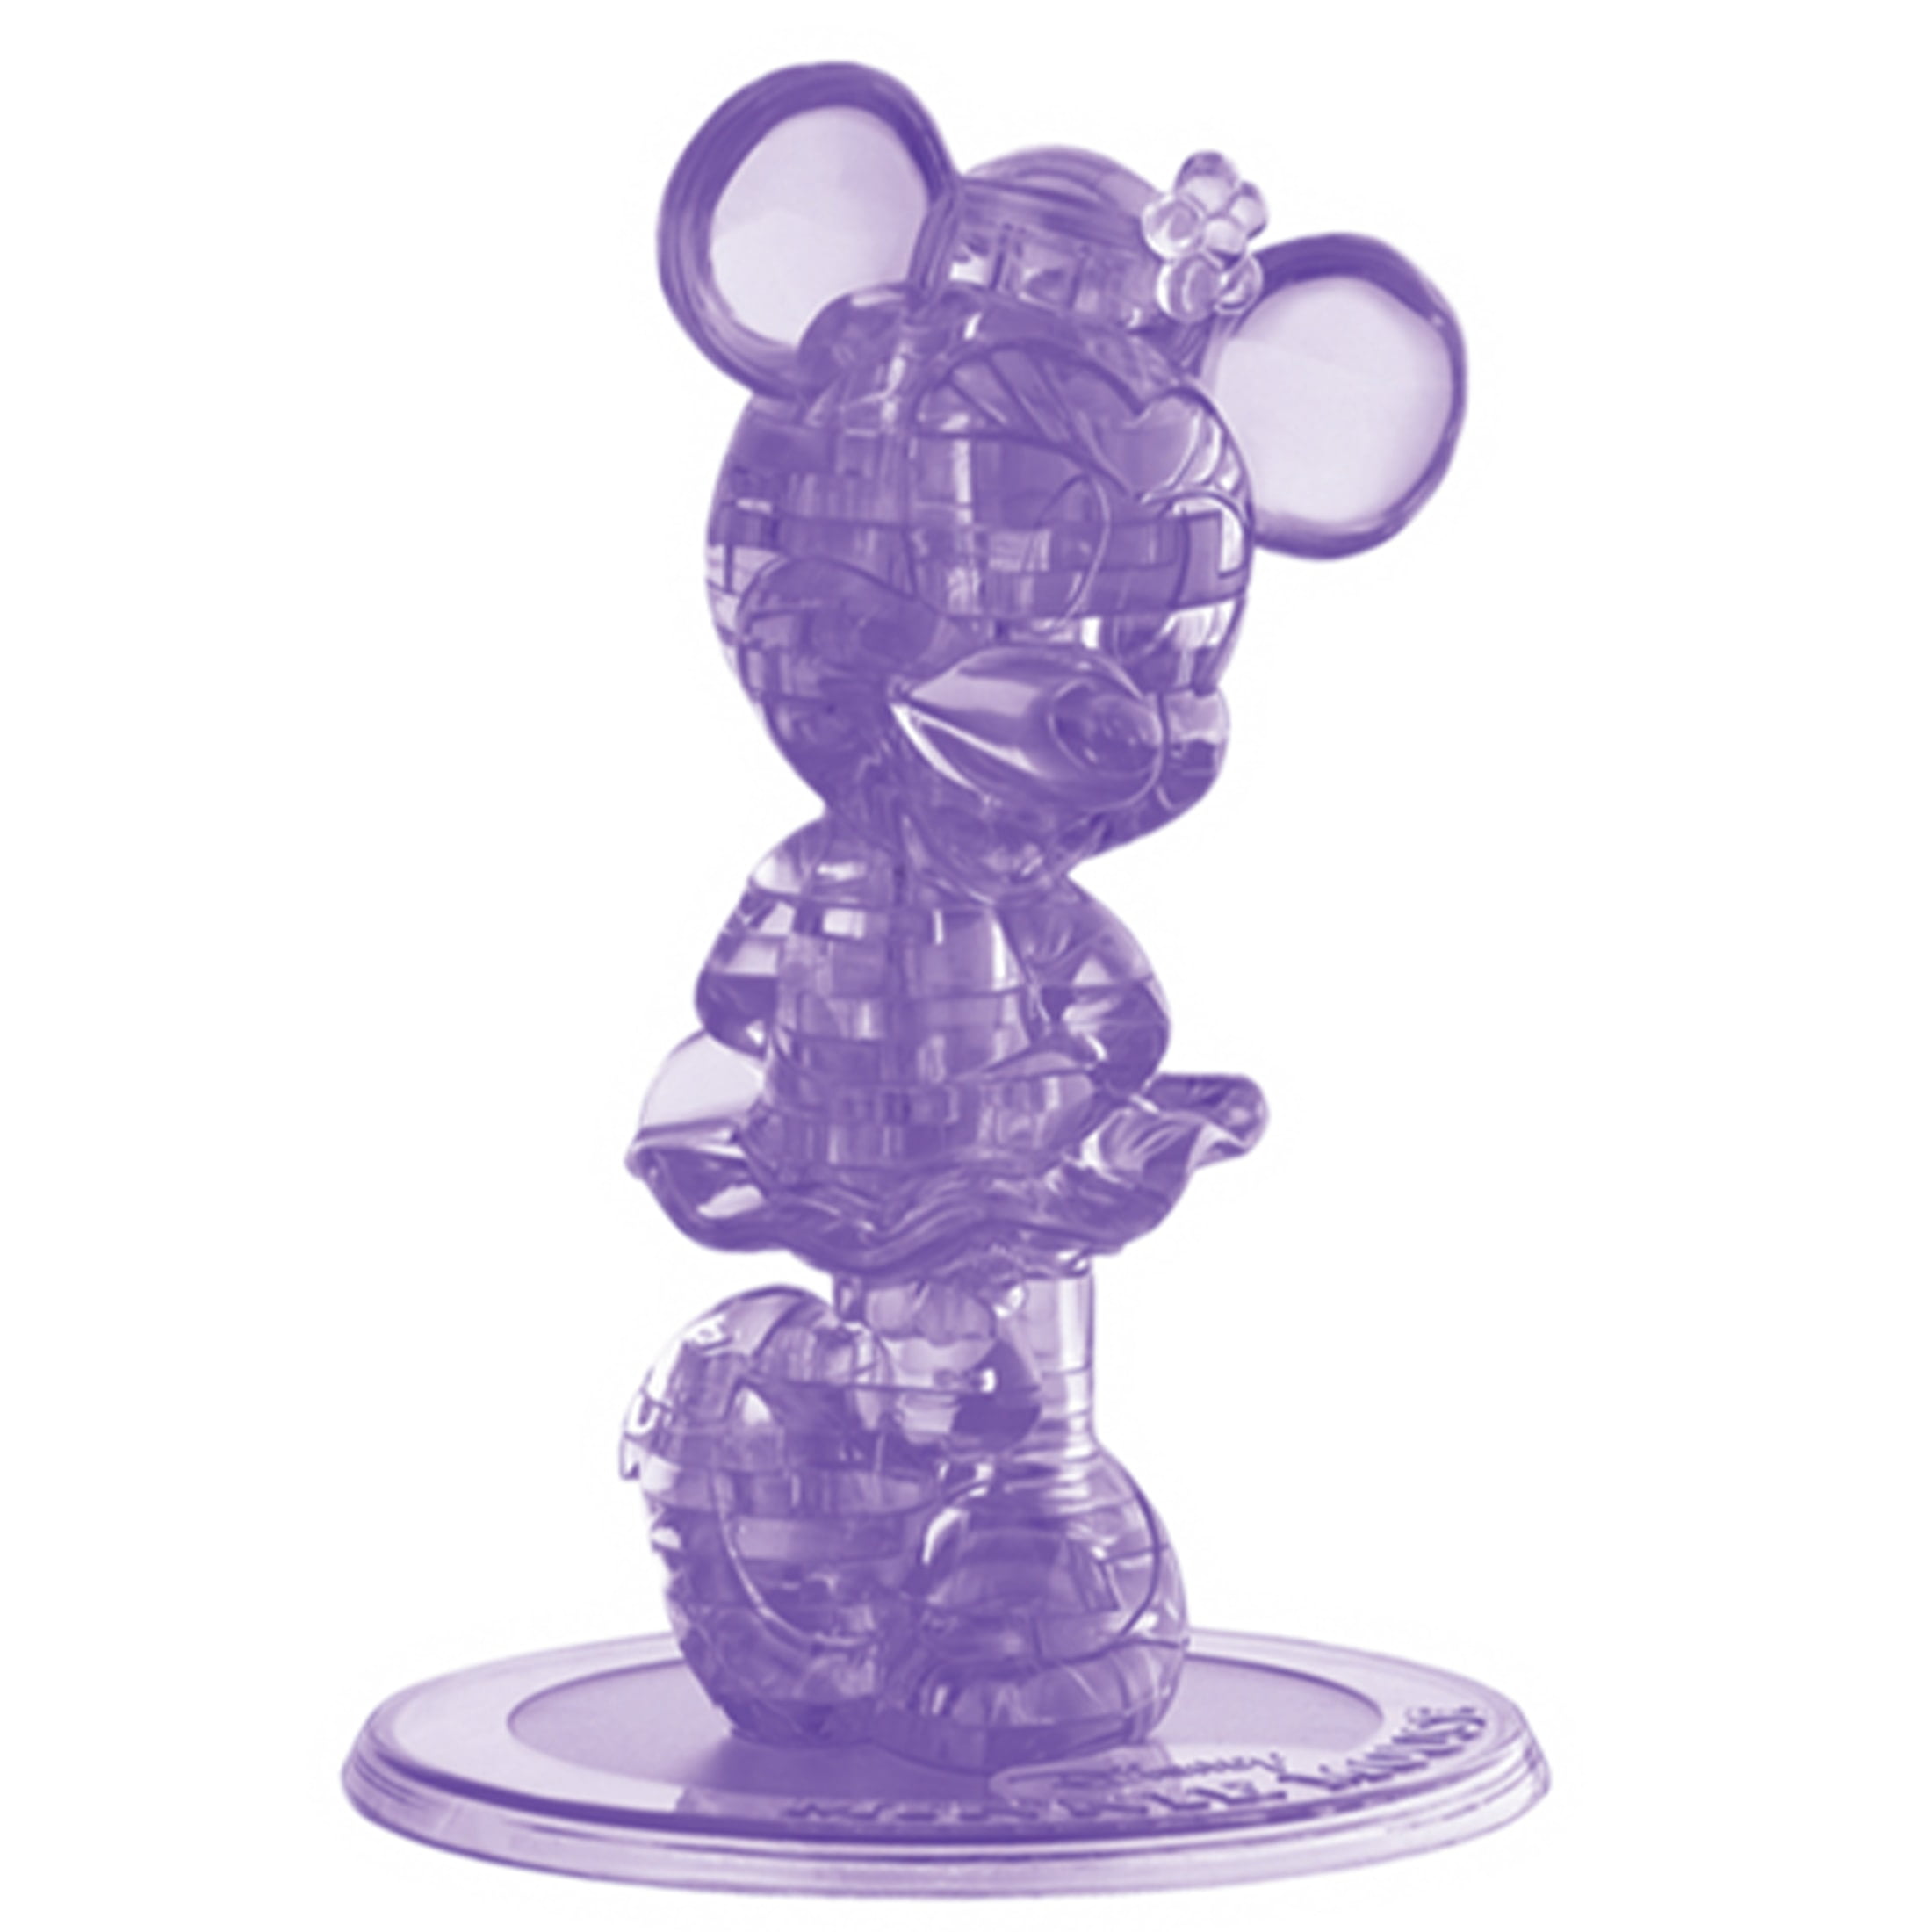 Ánimo Lago taupo Desmenuzar Disney Minnie Mouse Original 3D Crystal Puzzle by BePuzzled, Ages 12 and Up  - Walmart.com